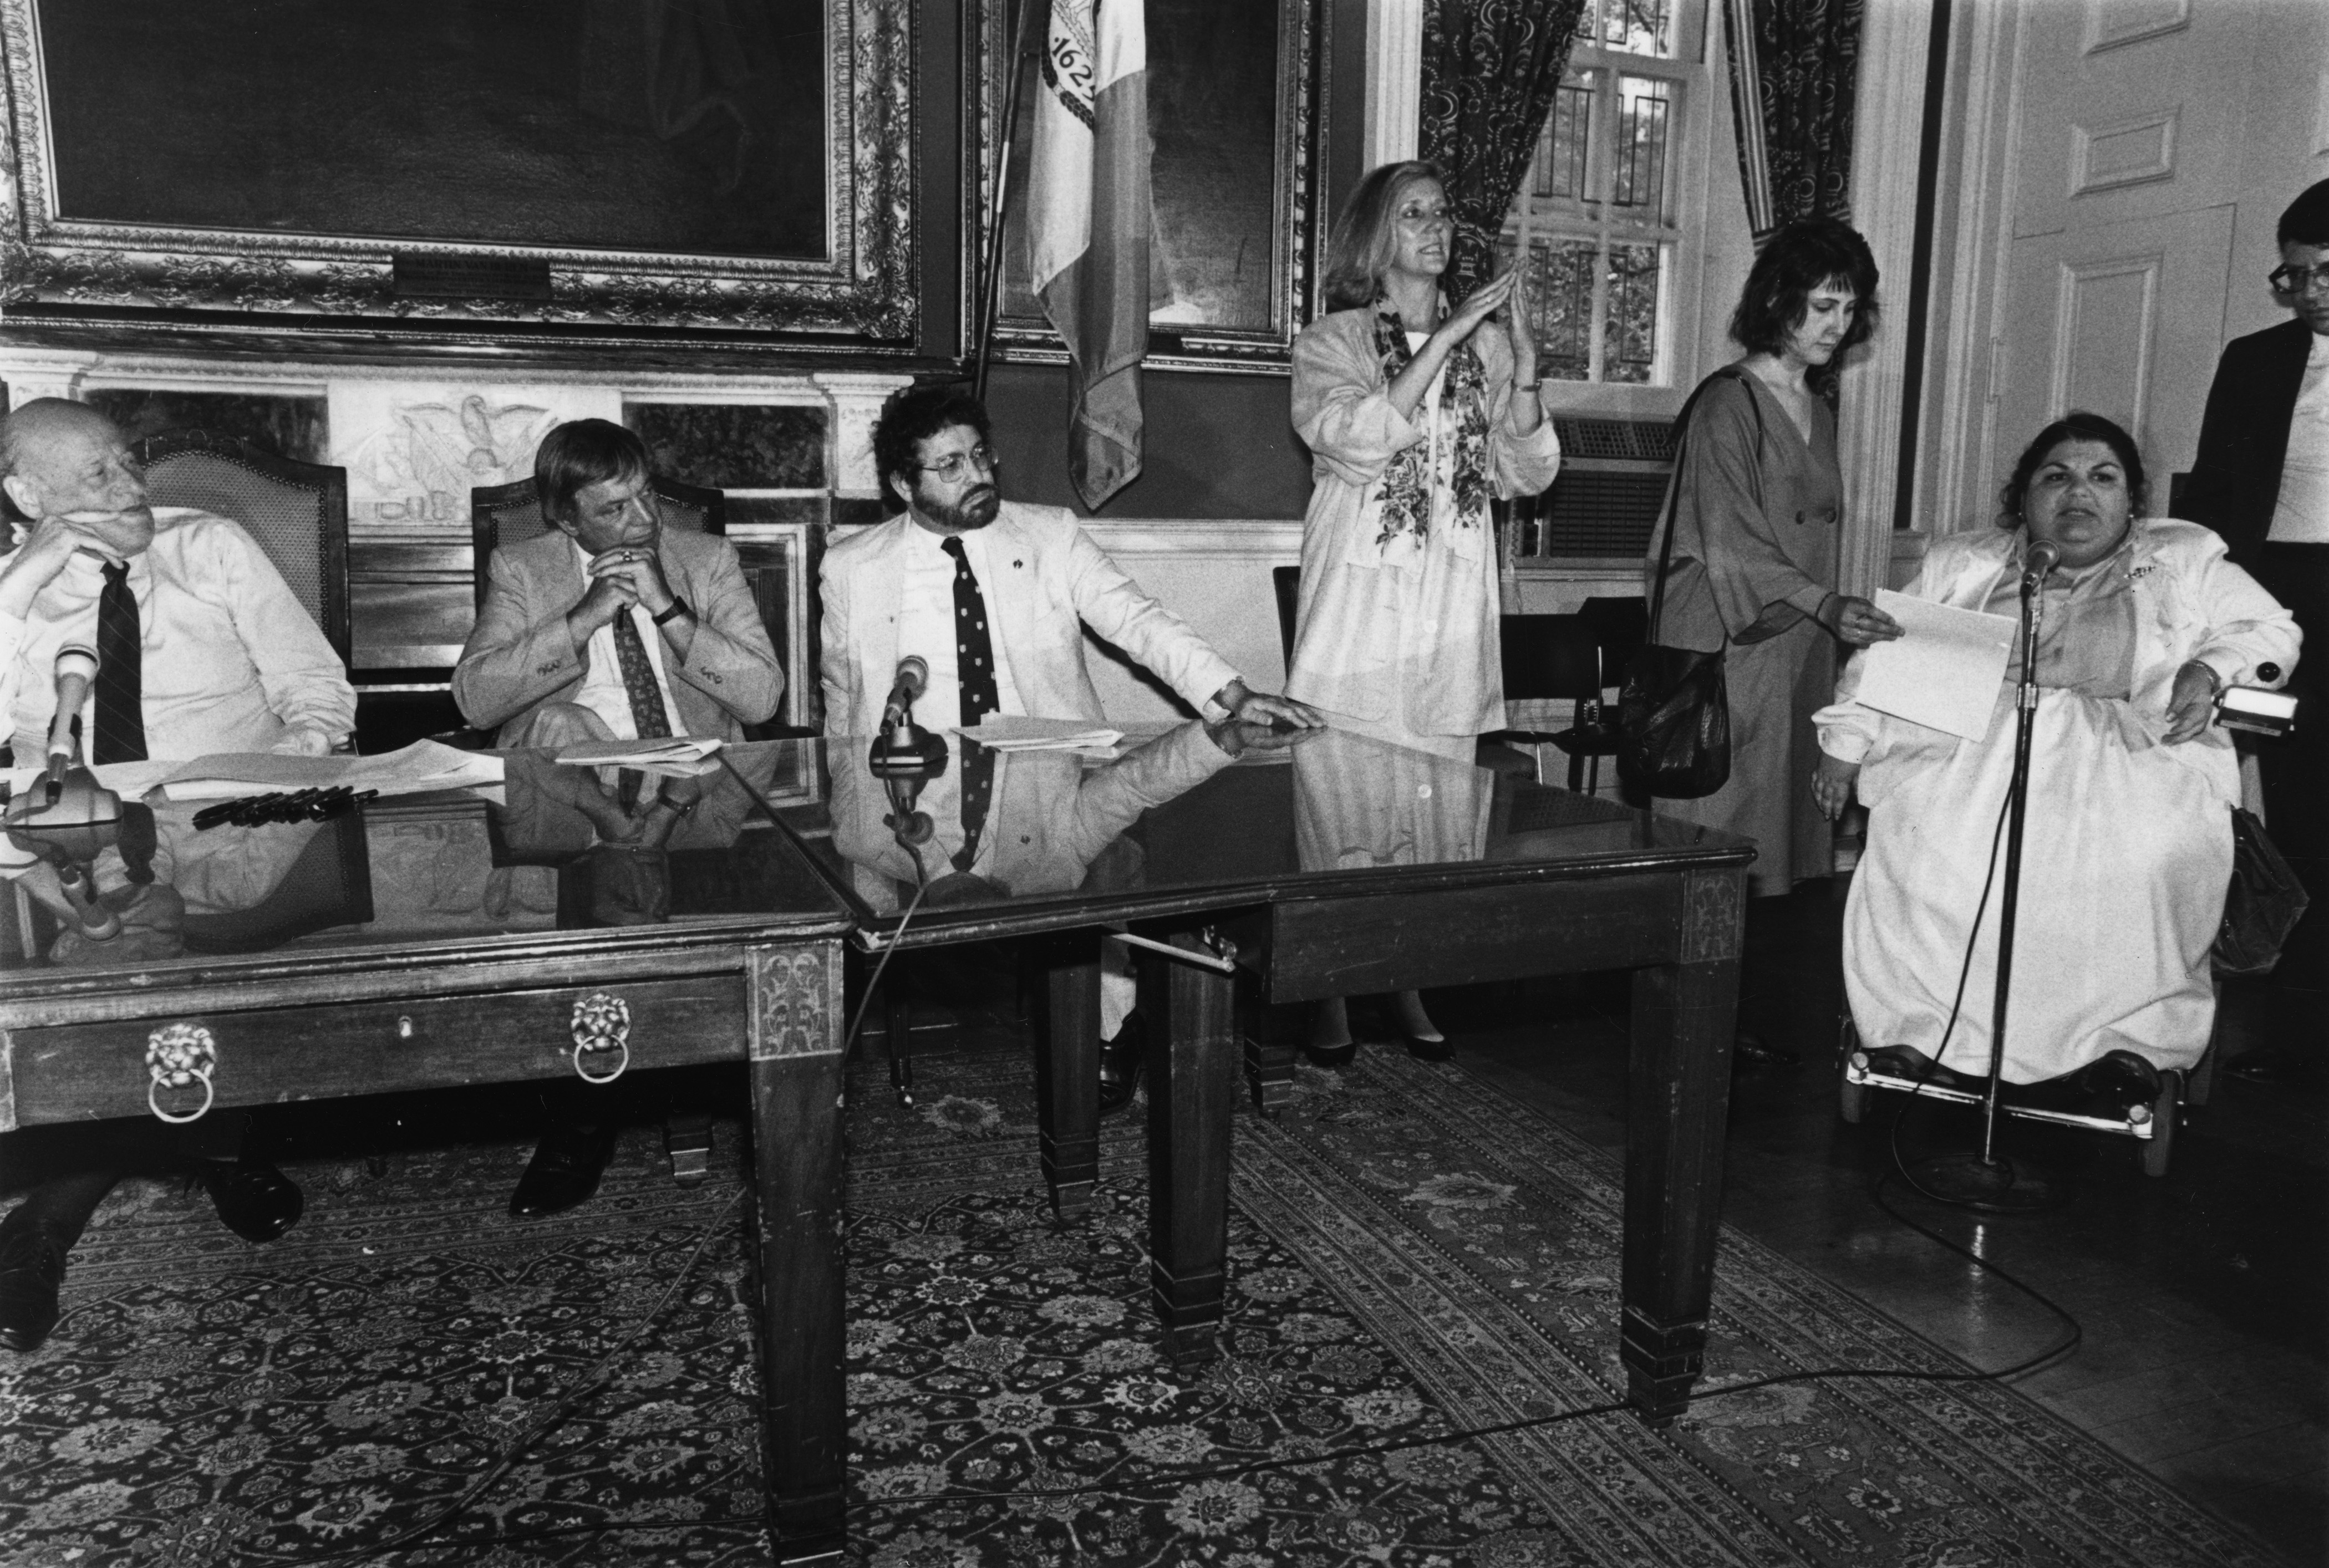 In an ornately decorated room, three men in suits sit at tables to the left with microphones. To there right, a woman stands, signing, while further right, another women holds paper/speech for a third woman in a wheelchair, who speaks into a mic stand. 